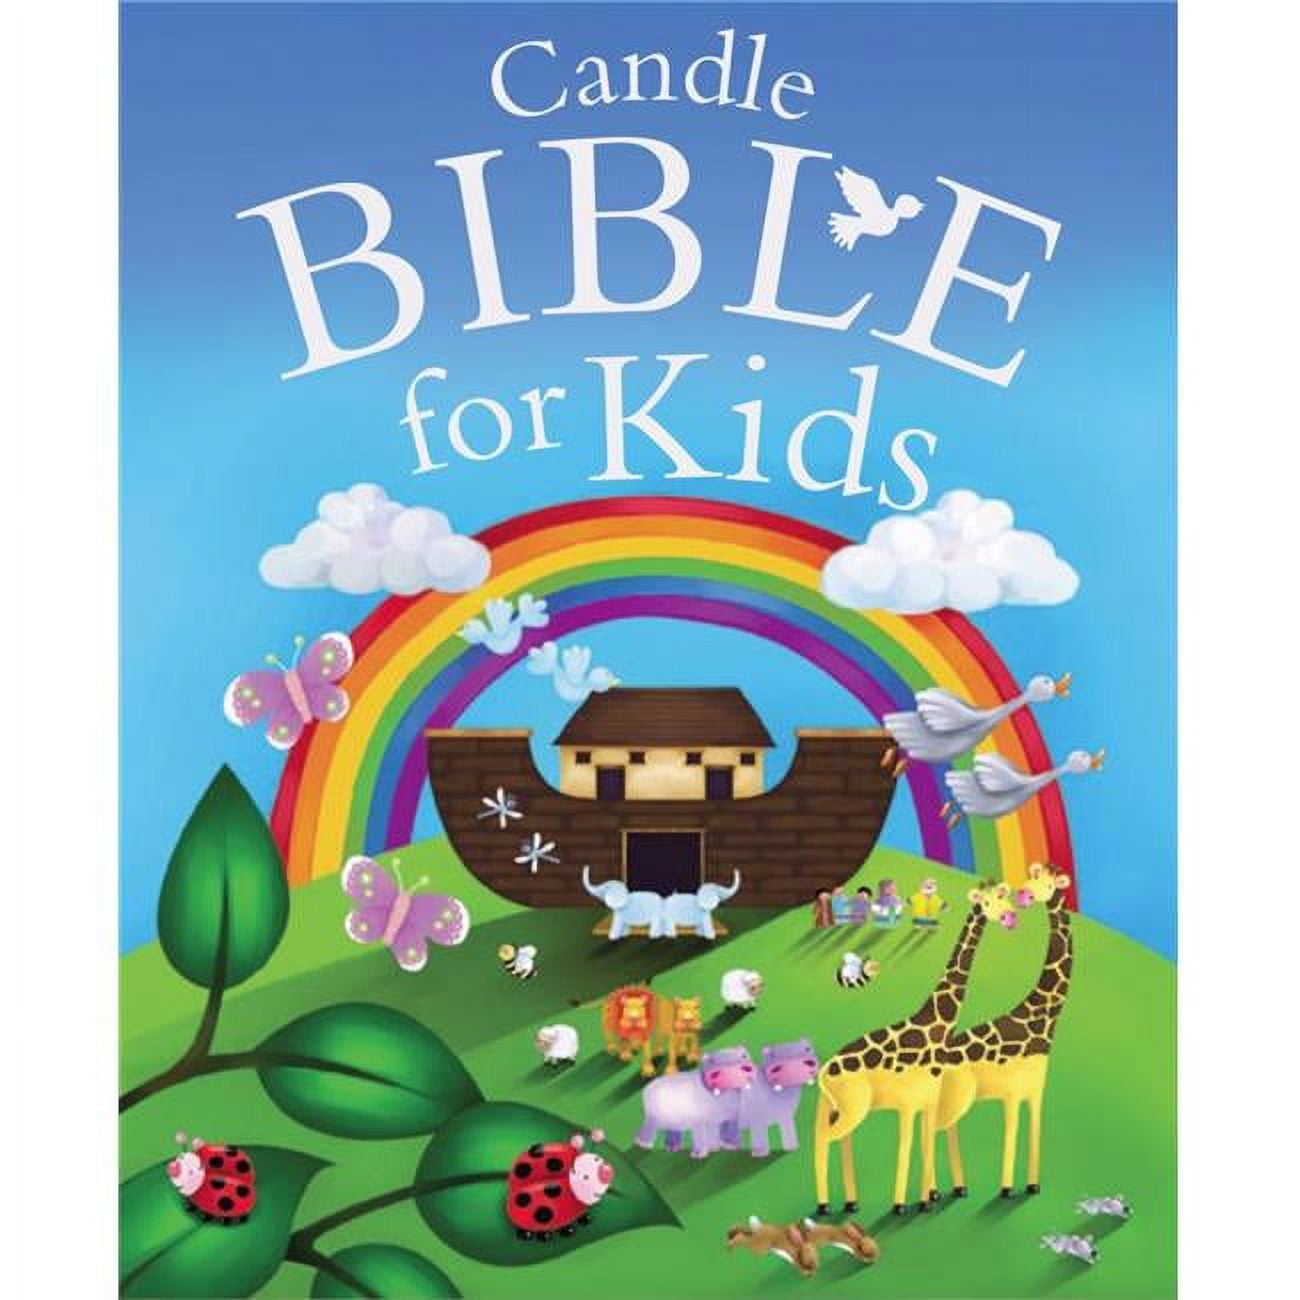 145017 Candle Bible For Kids